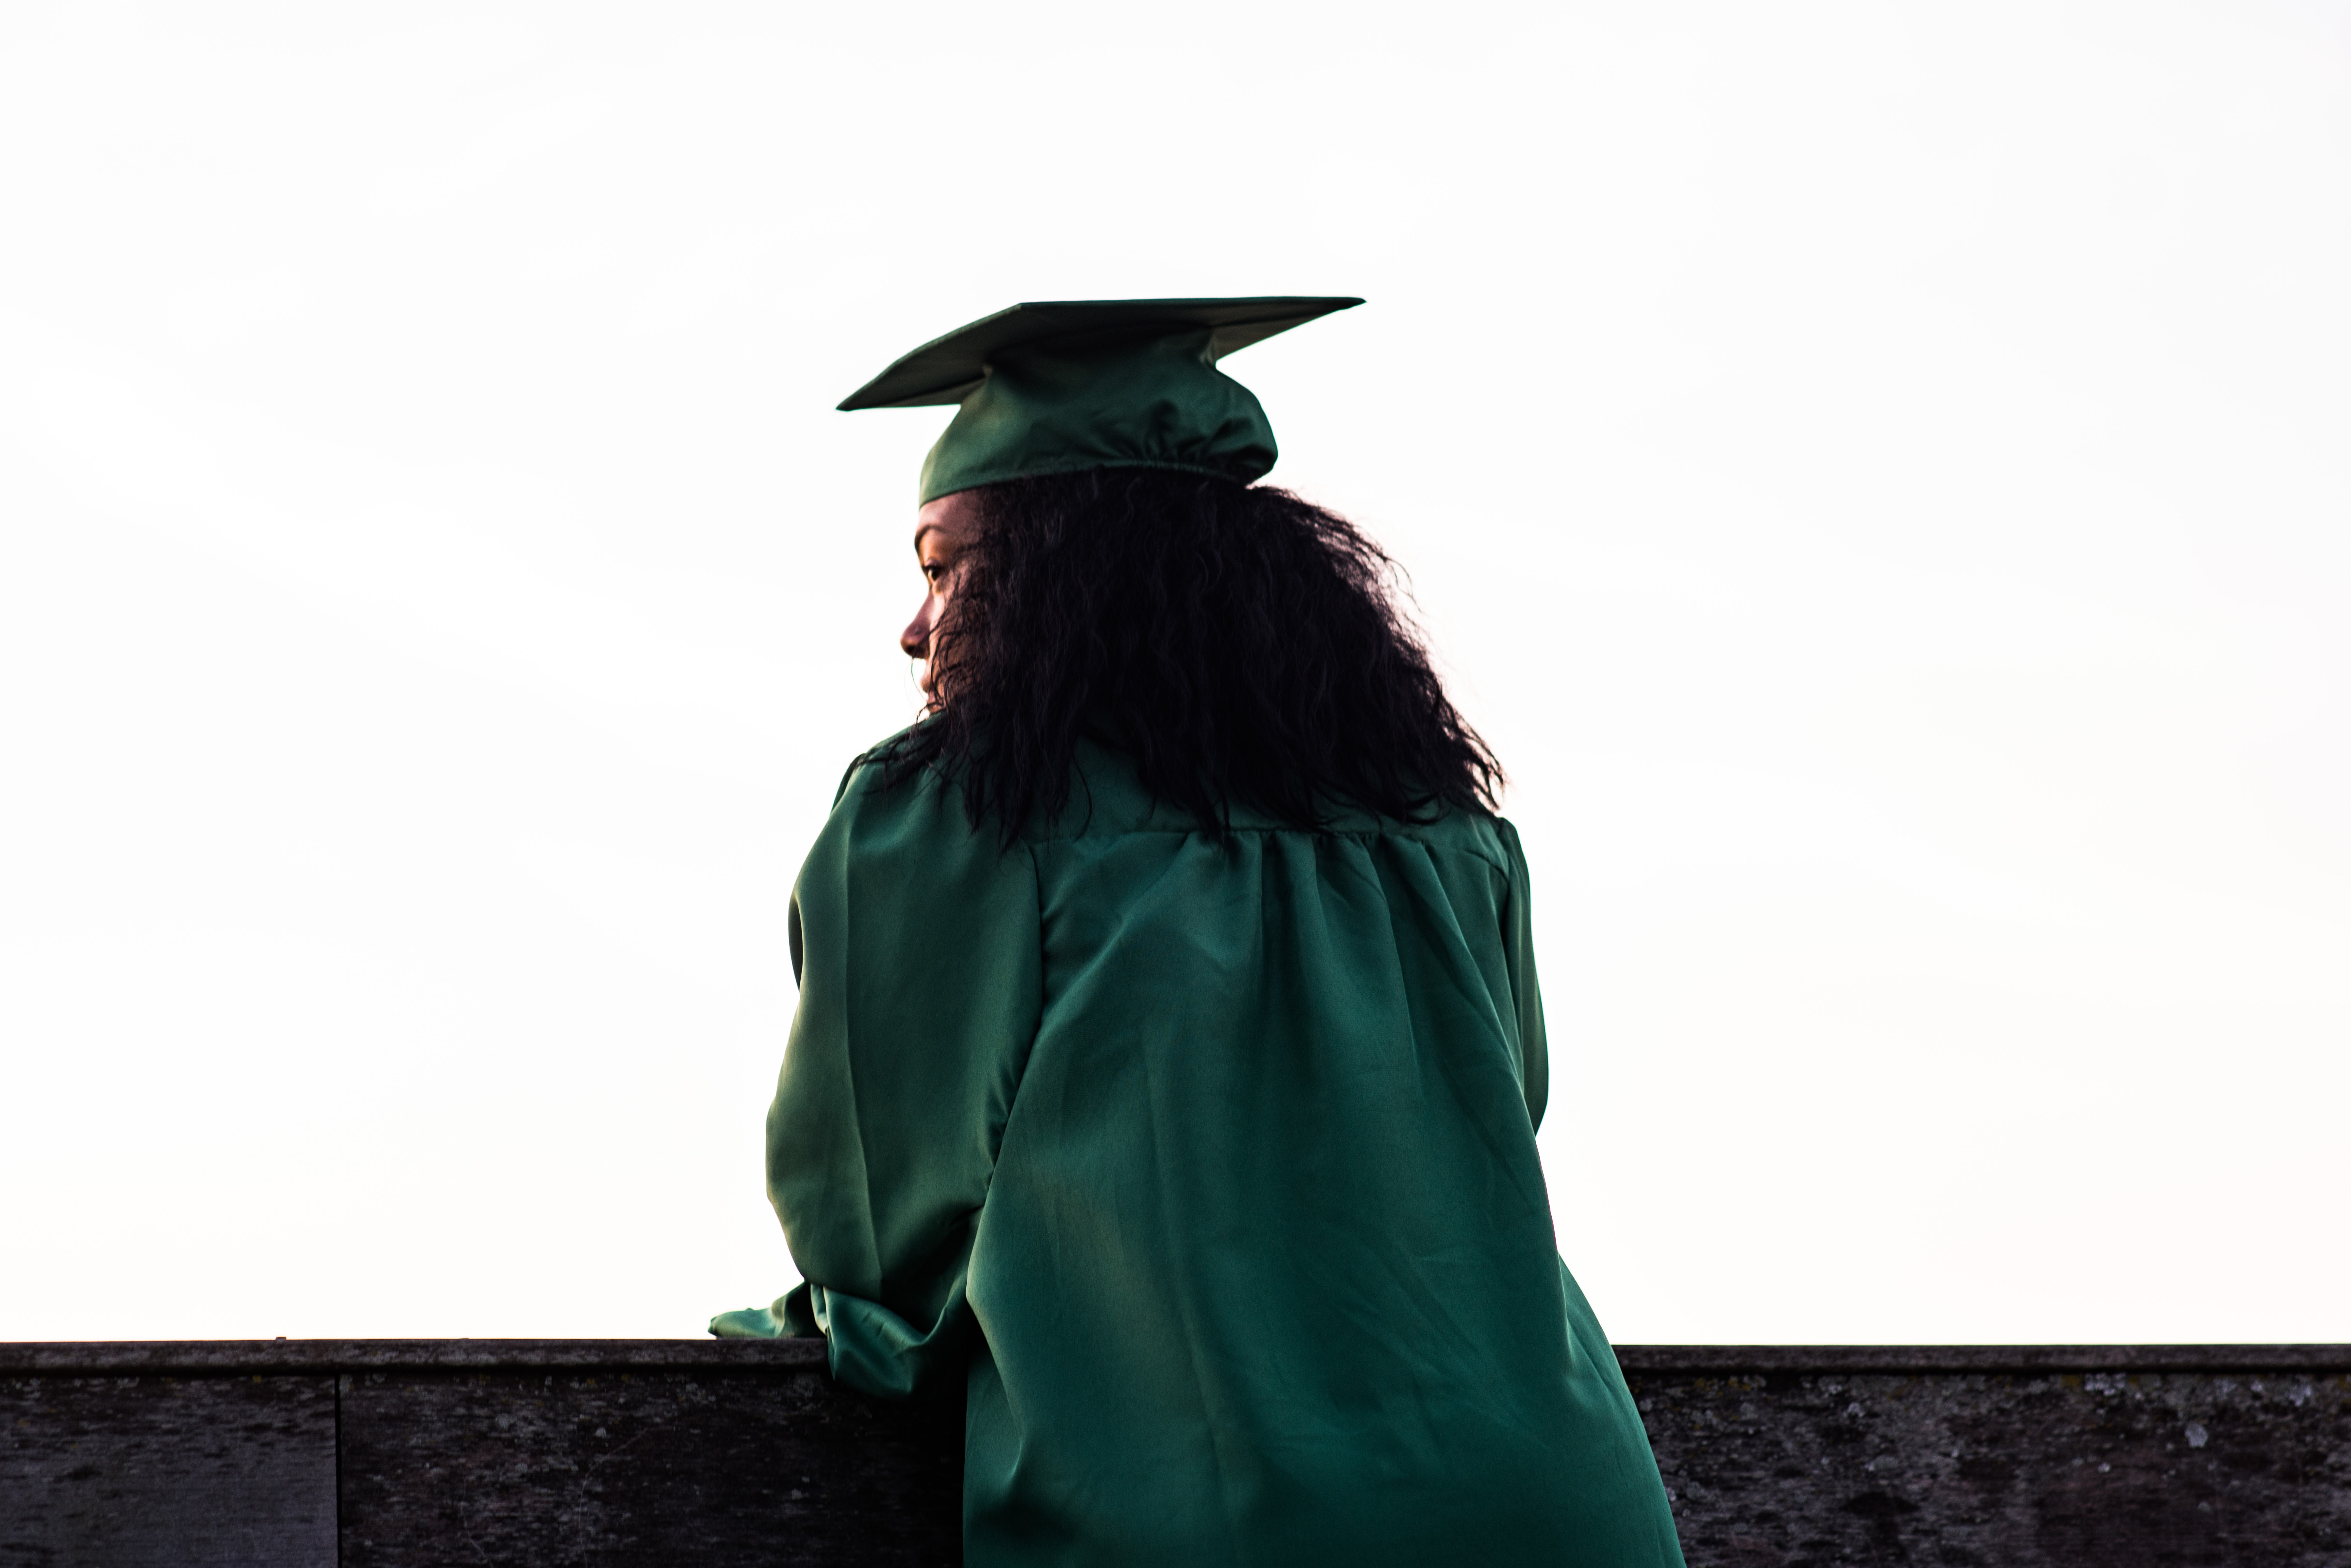 14-Year-Old Shania Muhammad To Graduate With Honors From Two Colleges